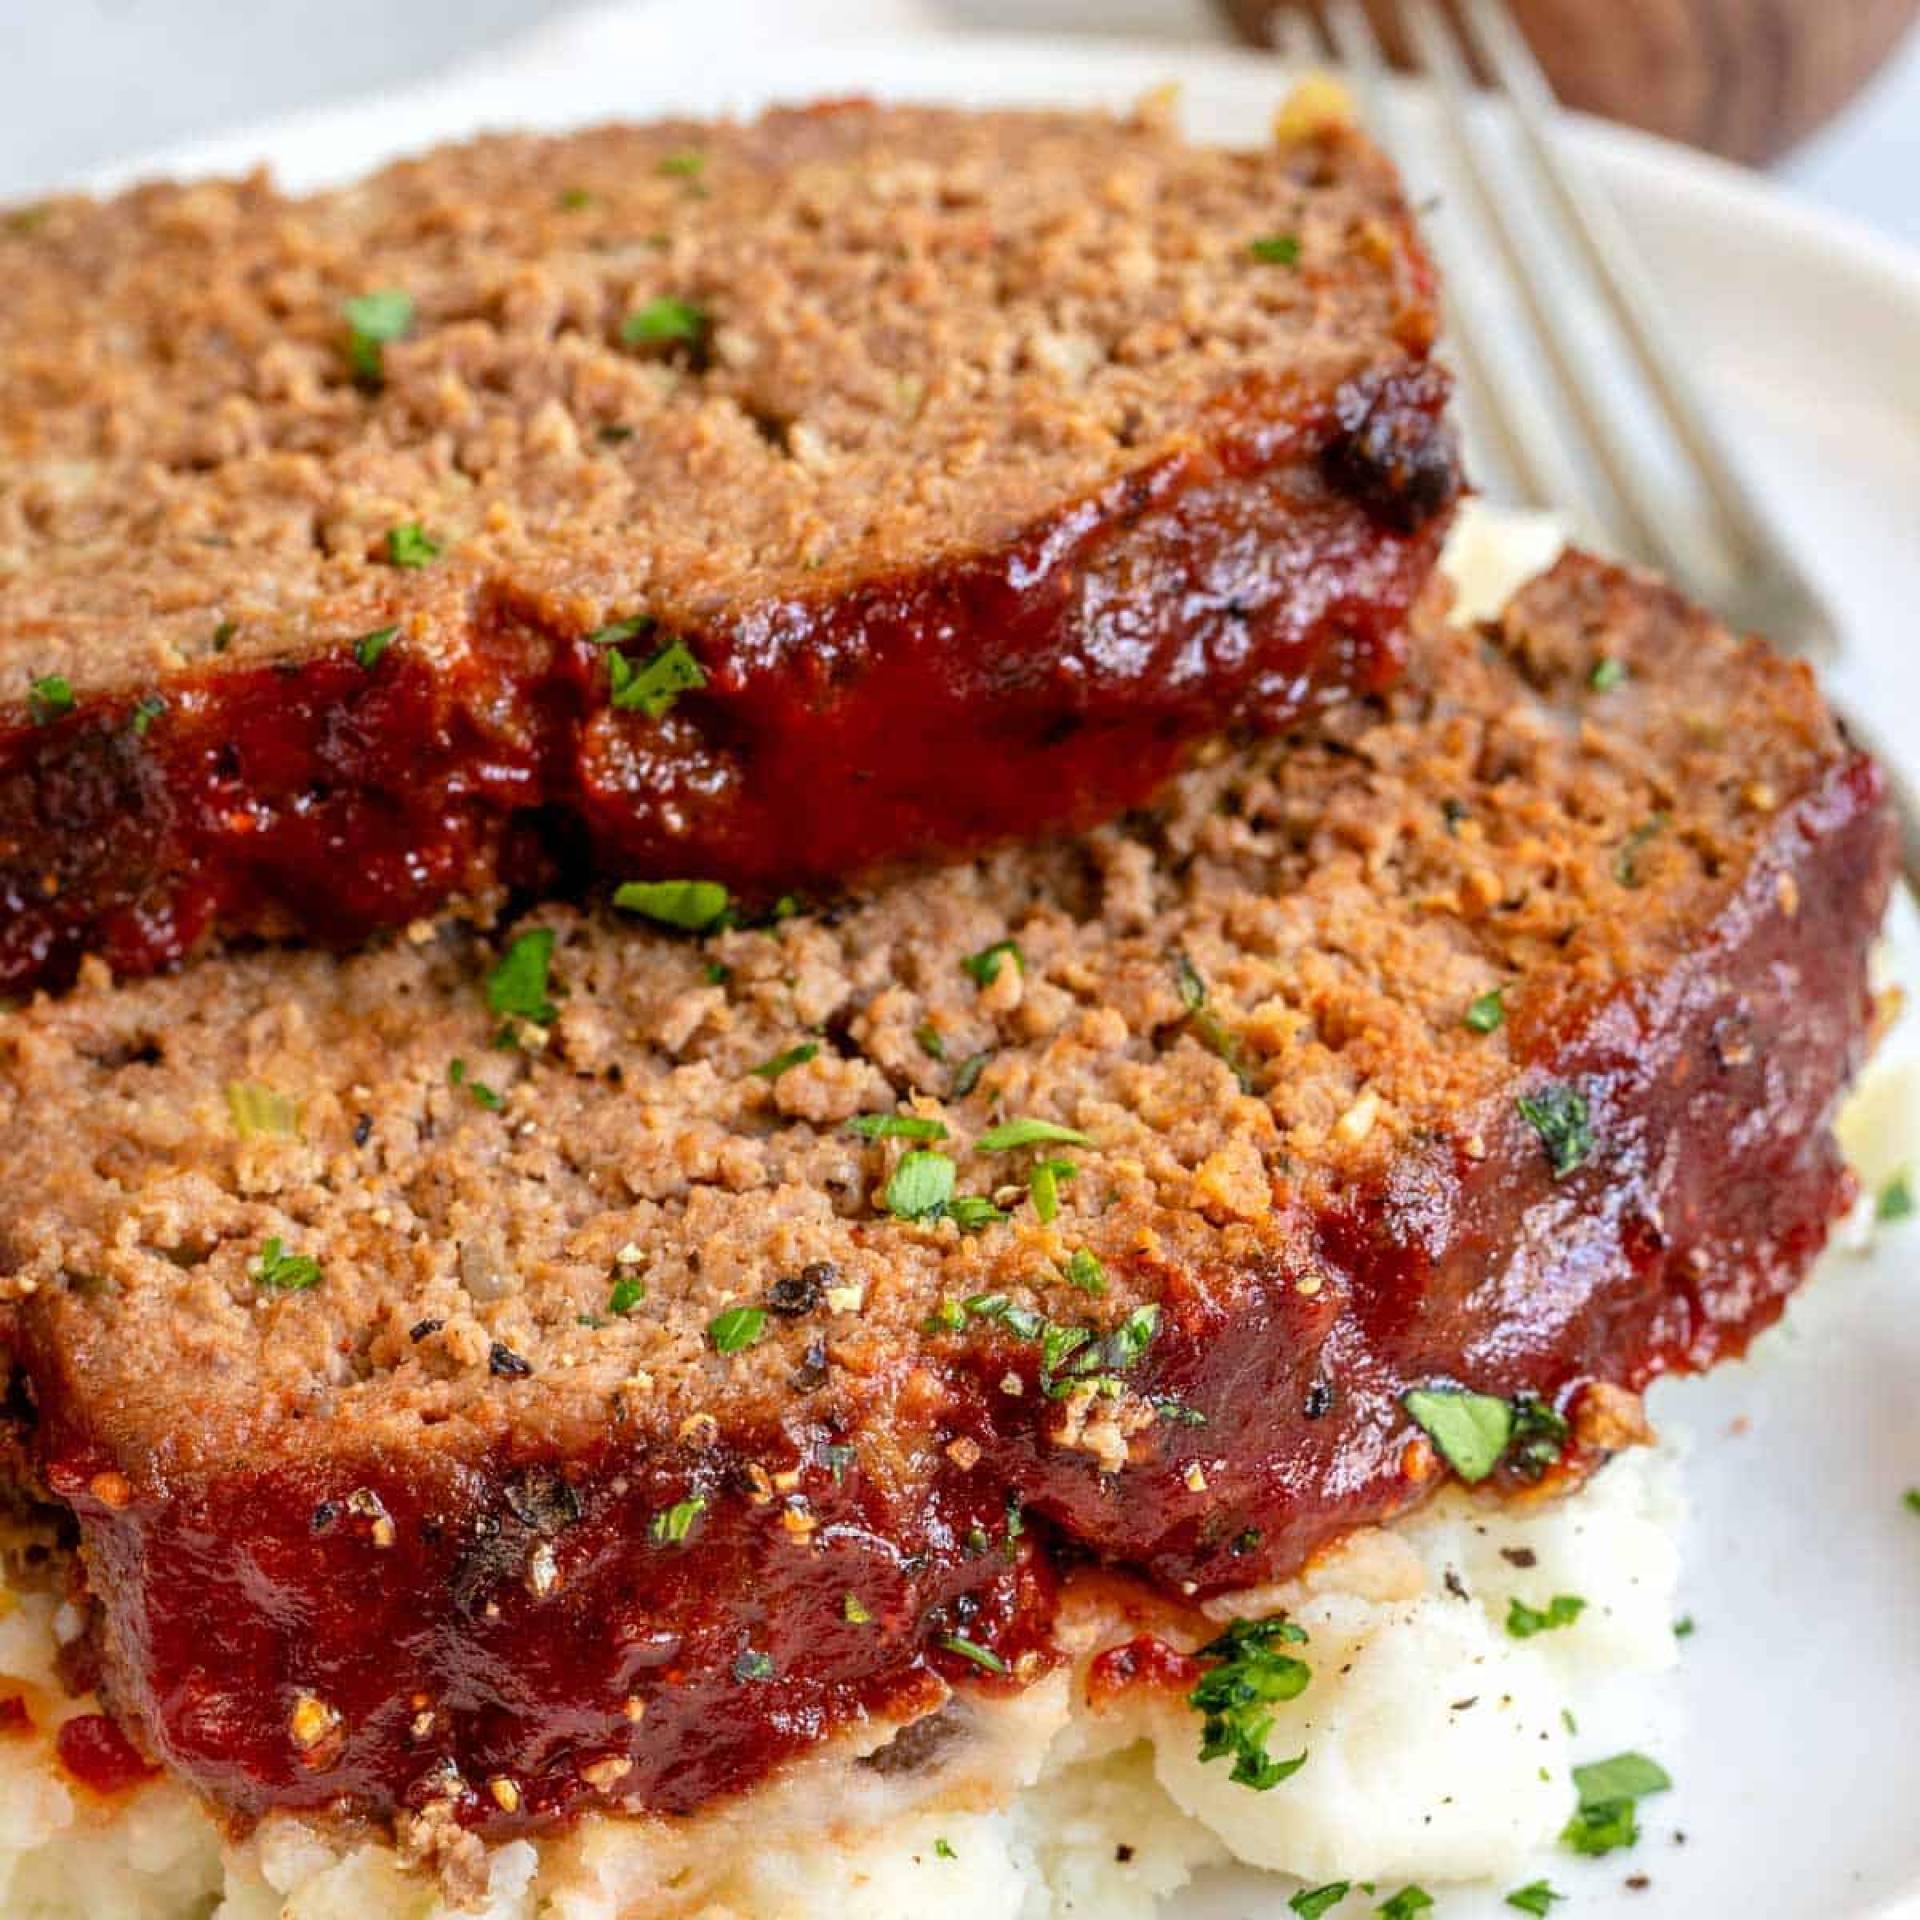 Beef Meatloaf With Mashed Potatoes and Green Beans.